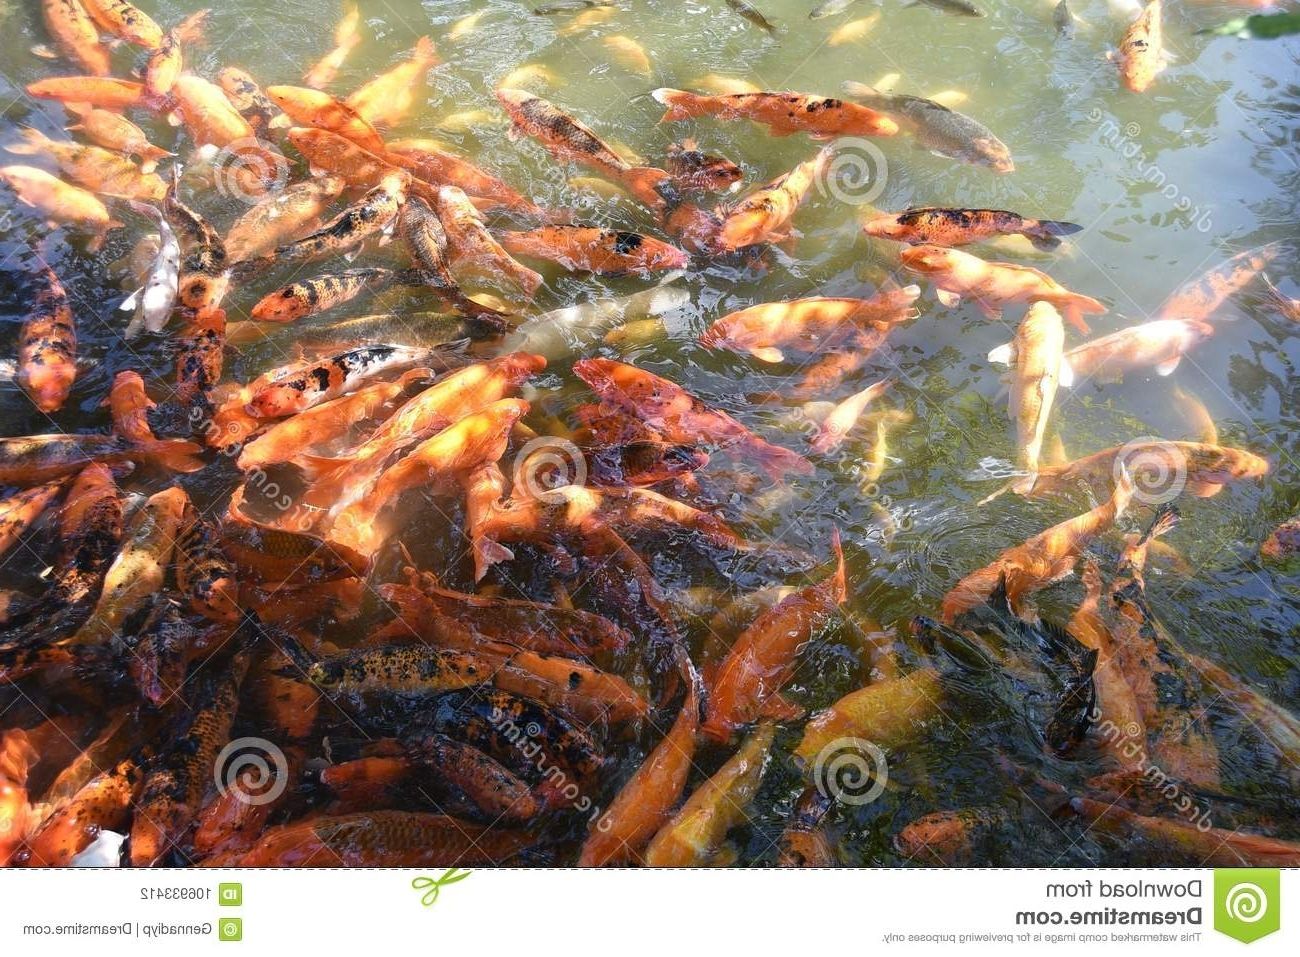 Fashionable A Pond With Koi Fish Stock Photo (View 7 of 20)